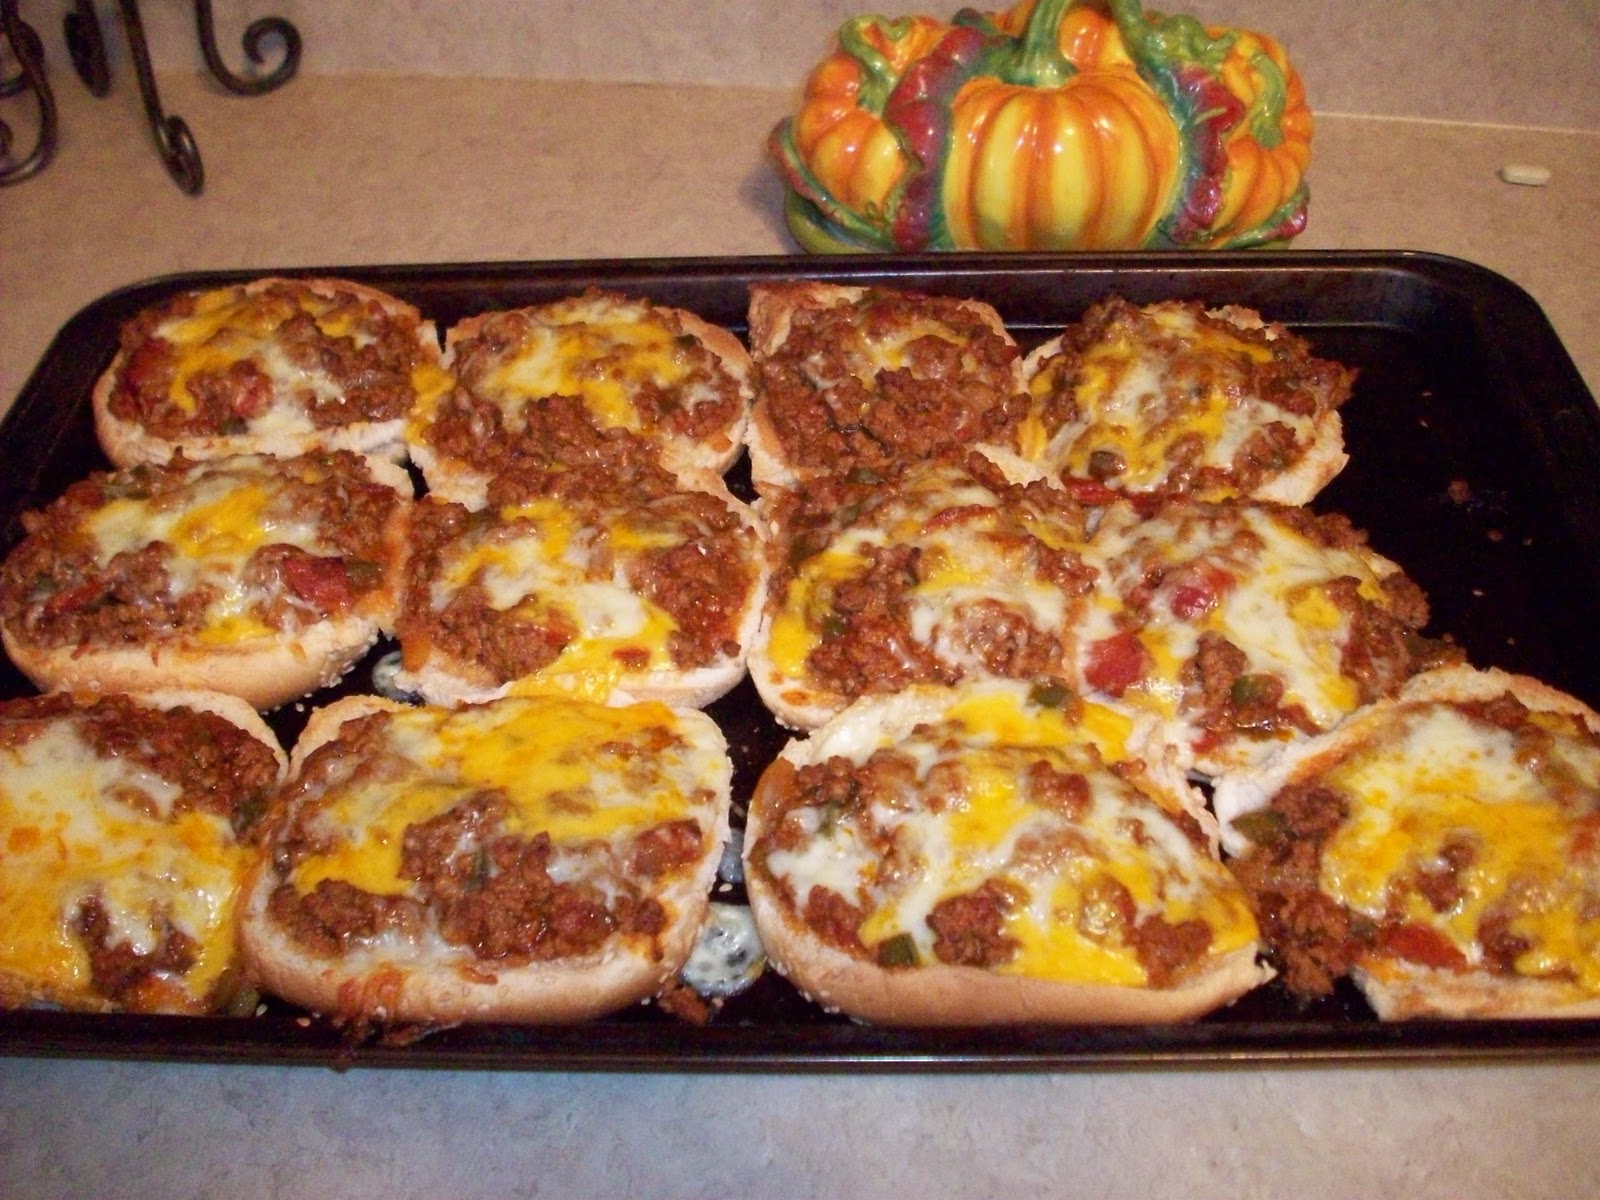 If The Creek Don't Rise: Pizza Burgers